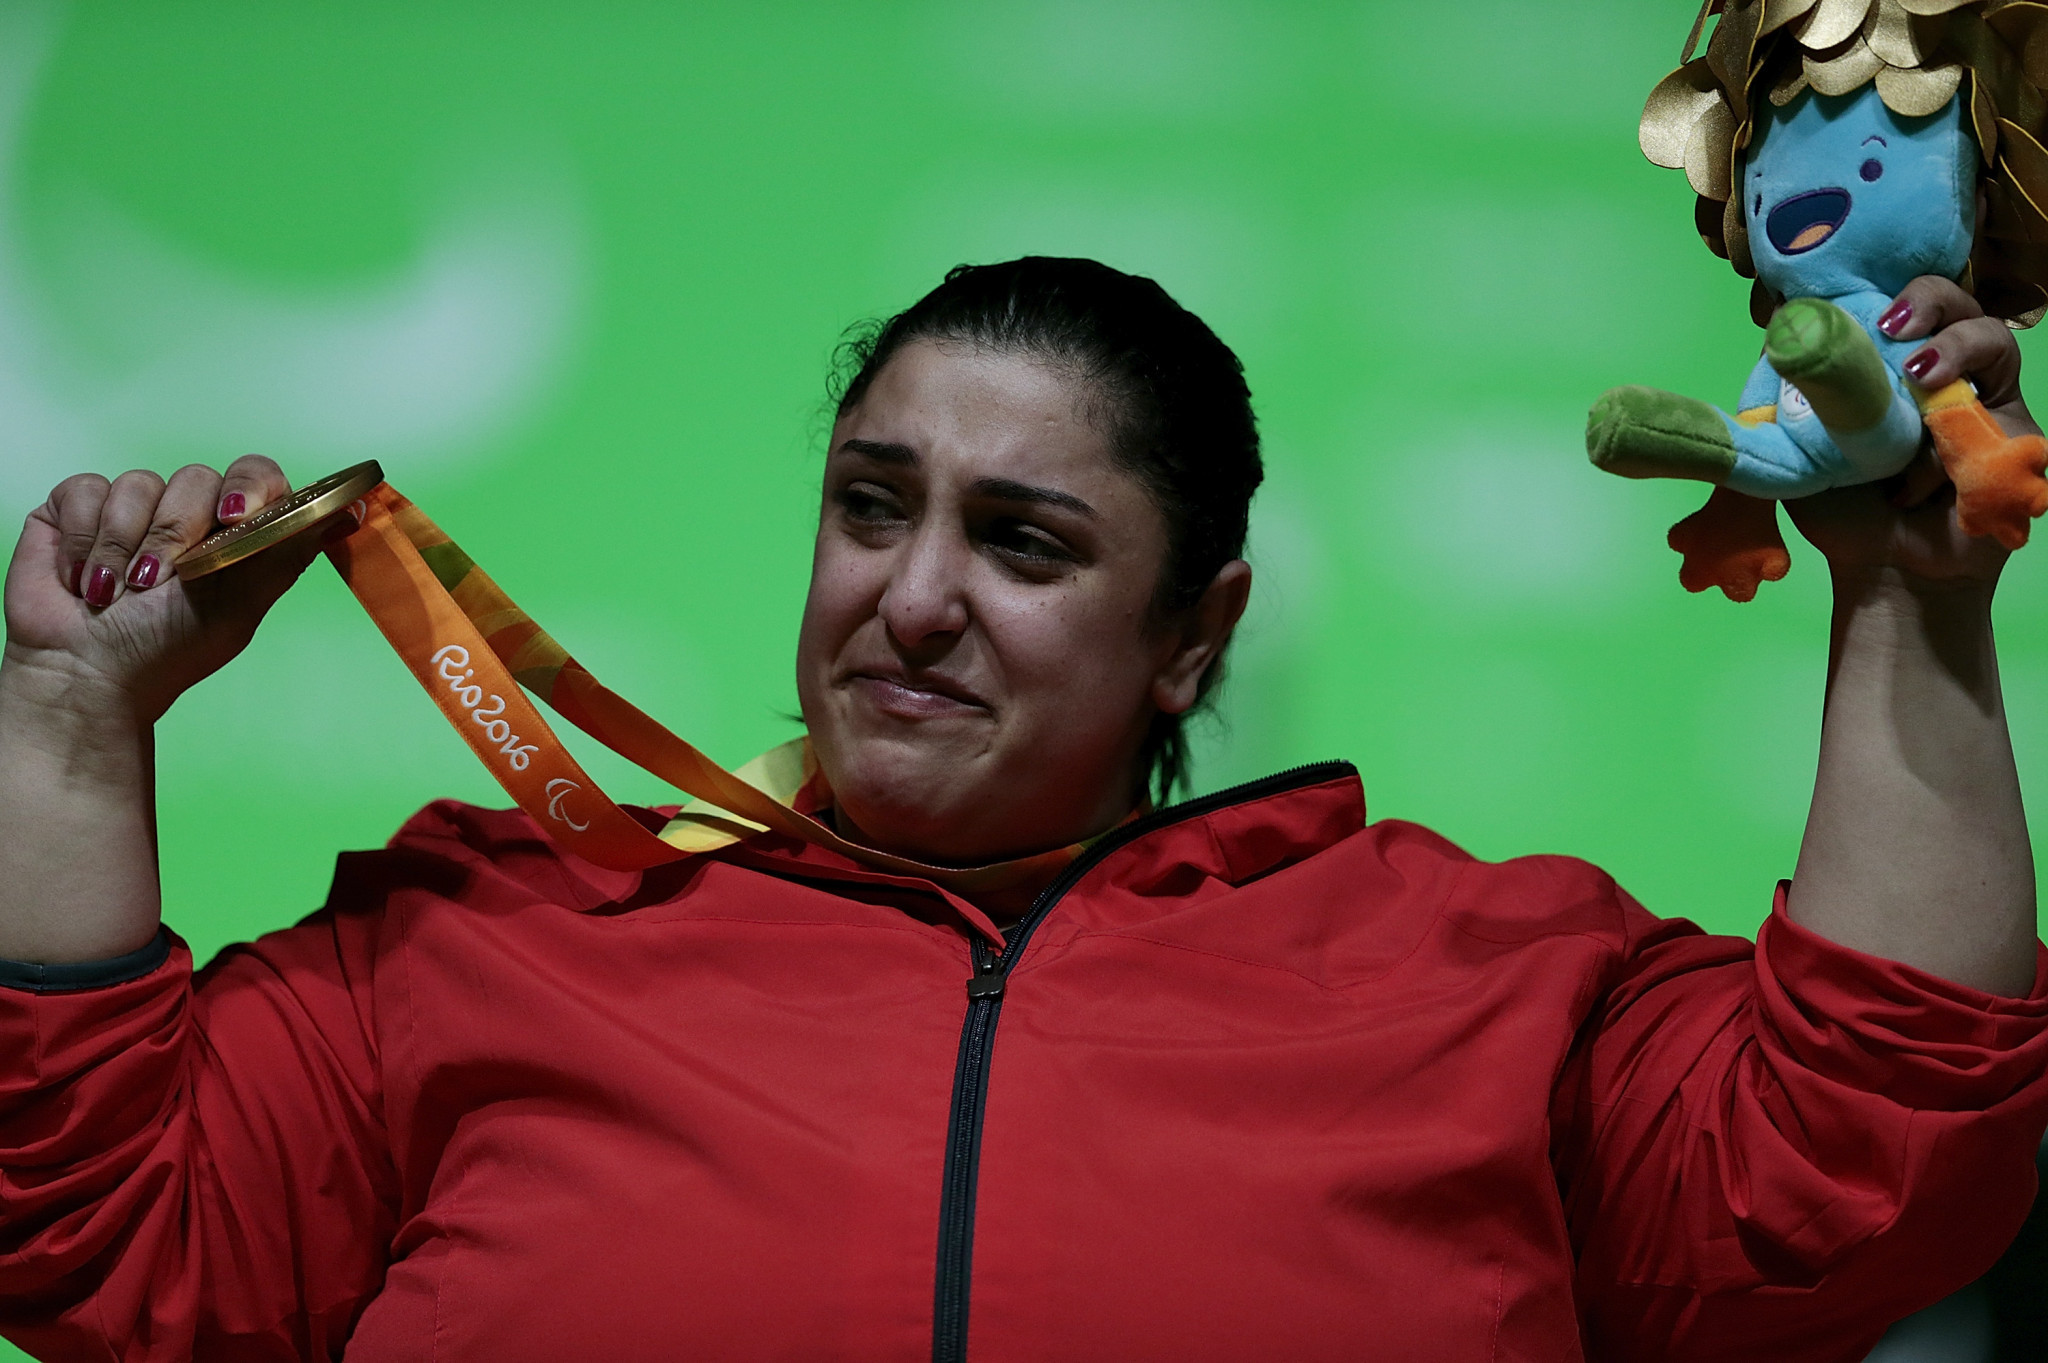 Randa Mahmoud of Egypt successfully defended her women's over 86kg crown ©Getty Images